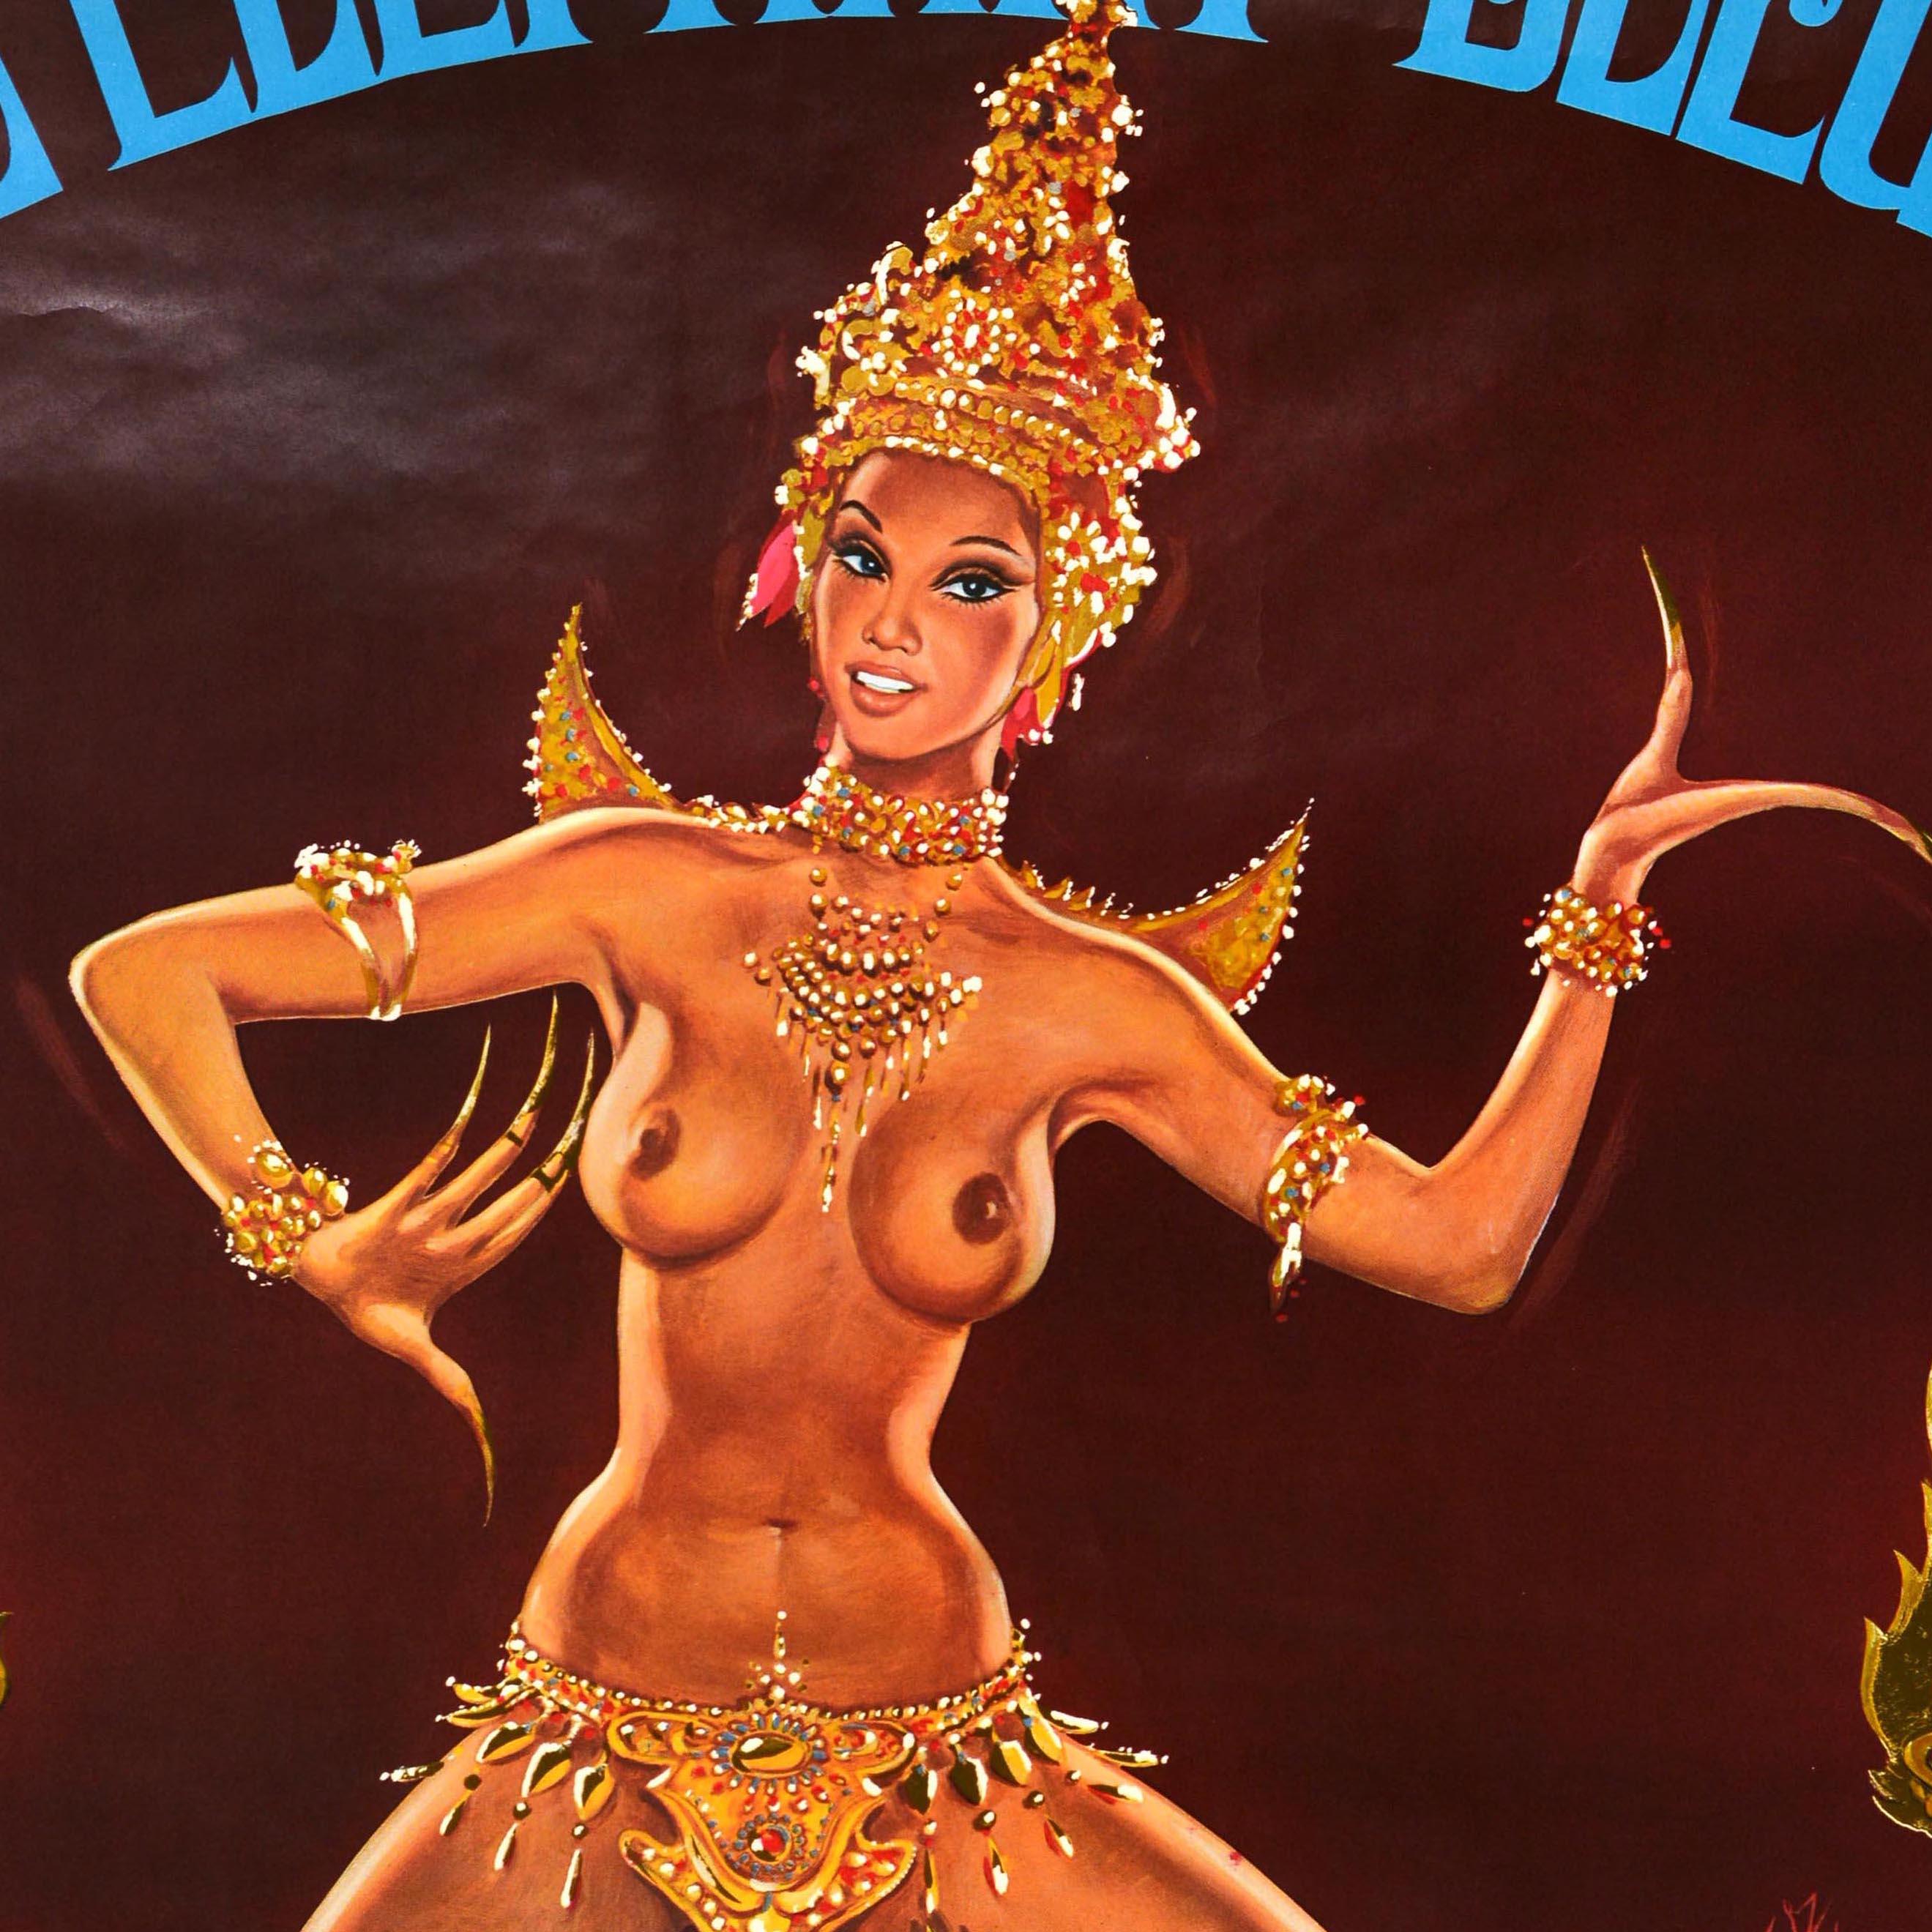 Original Vintage Advertising Poster Elephant Bleu Thai Show Dinner OKley Pin-Up - Print by Unknown